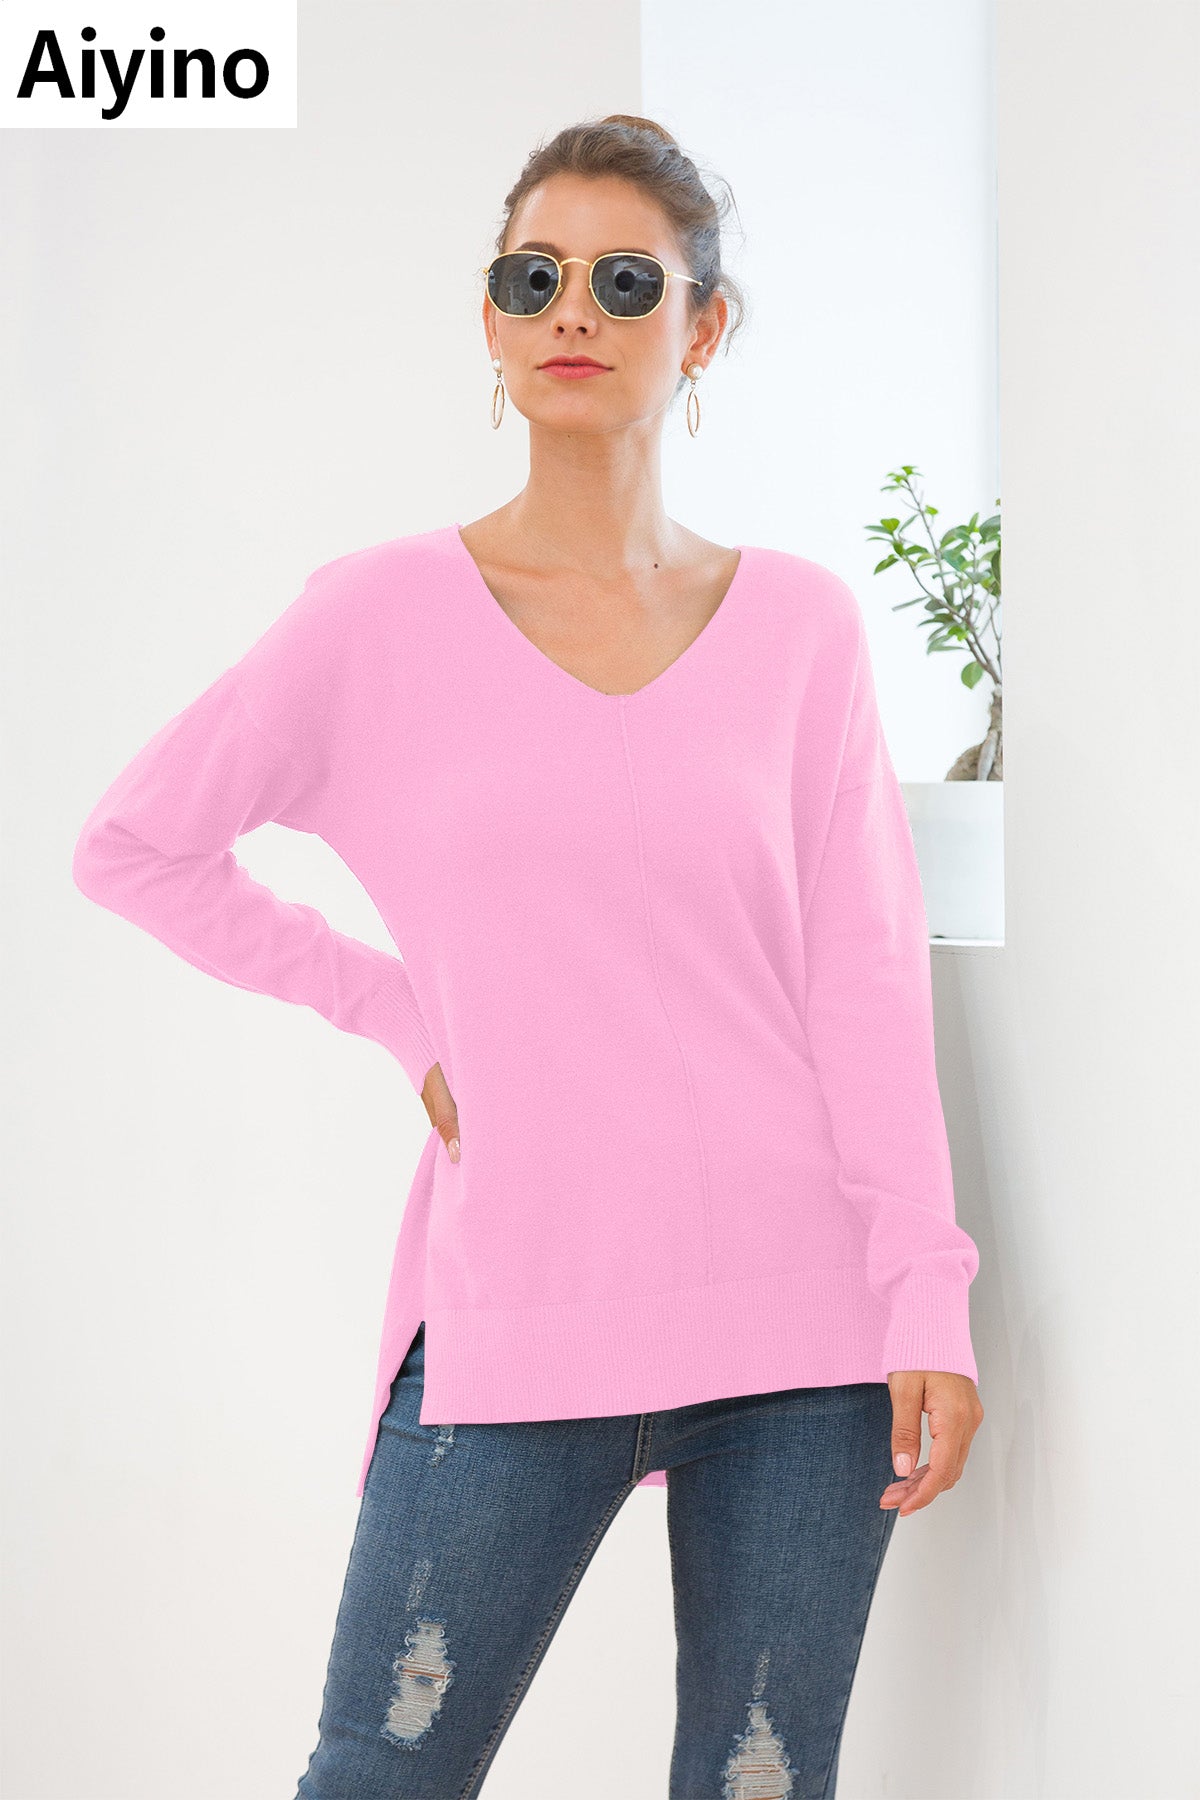 Aiyino Women's Casual Lightweight V Neck Batwing Sleeve Knit Top